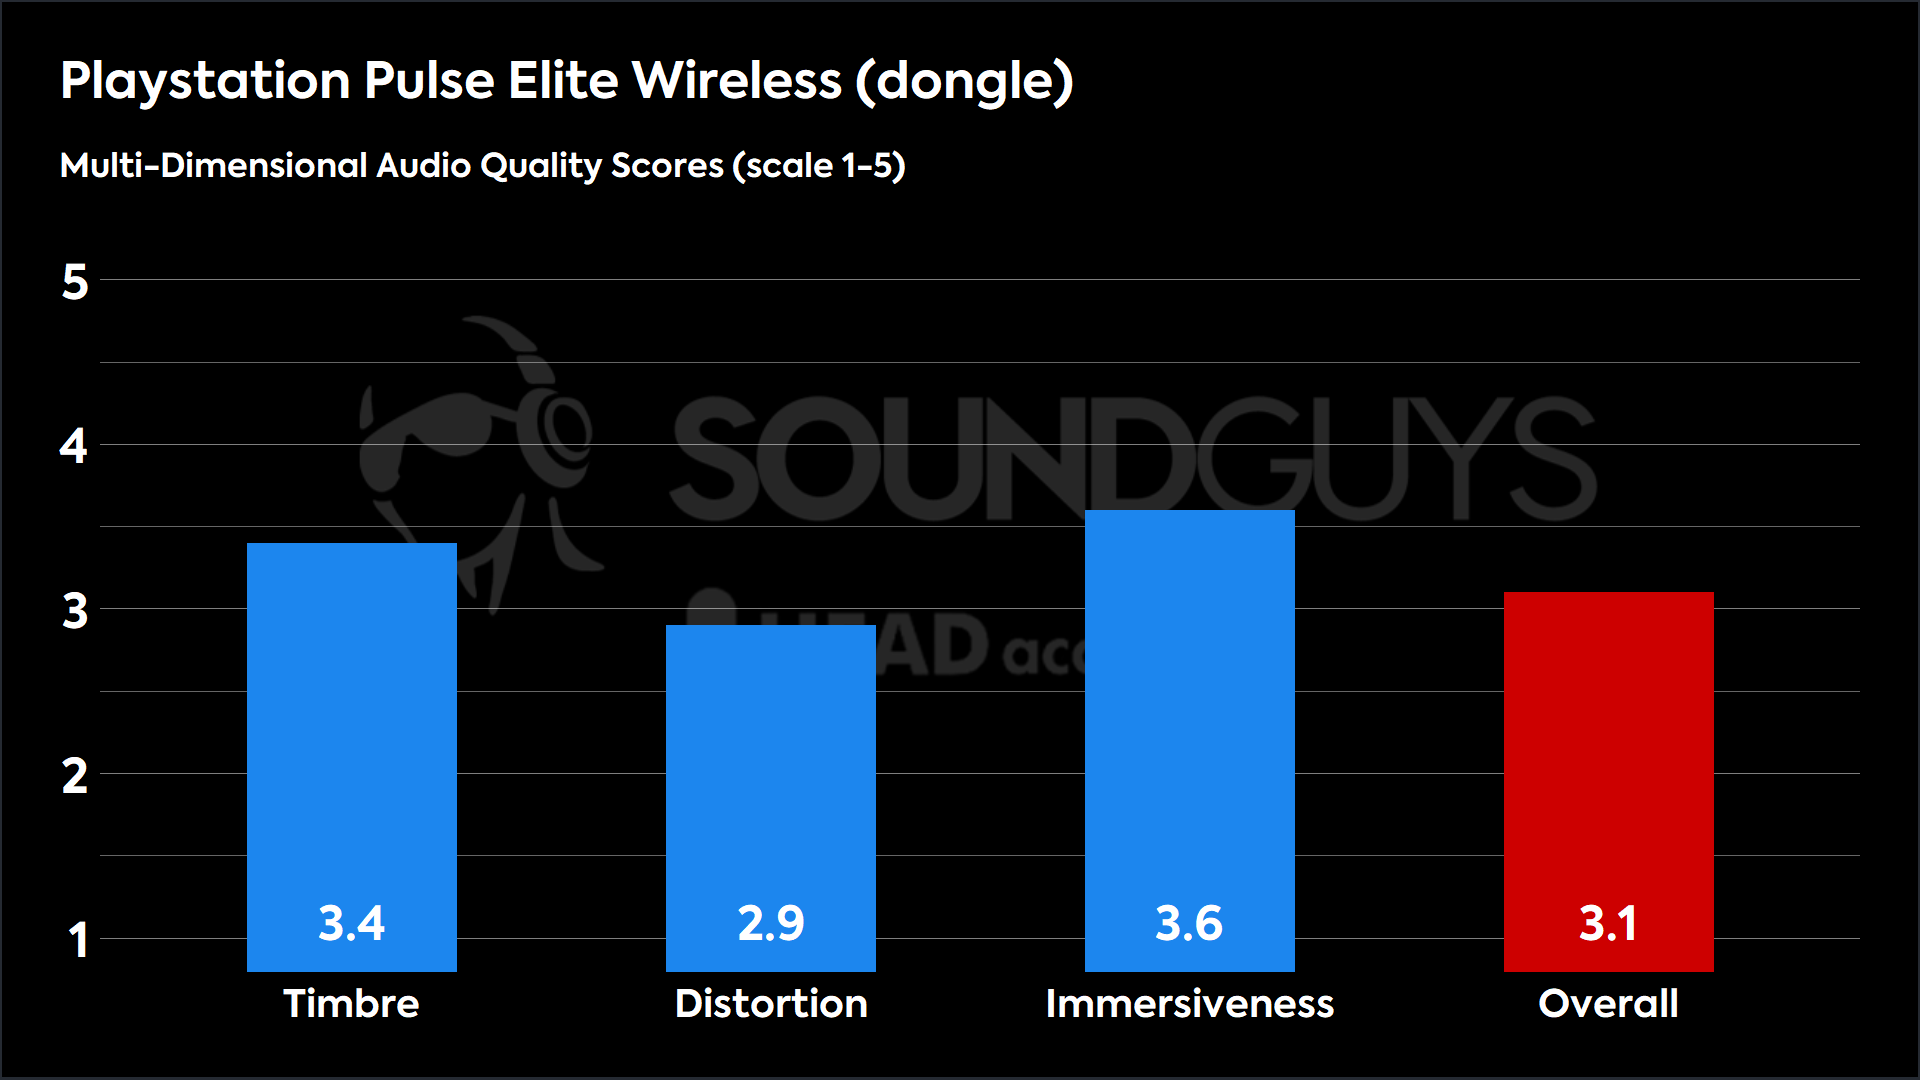 This chart shows the MDAQS results for the Playstation Pulse Elite Wireless in dongle mode. The Timbre score is 3.4, The Distortion score is 2.9, the Immersiveness score is 3.6, and the Overall Score is 3.1).